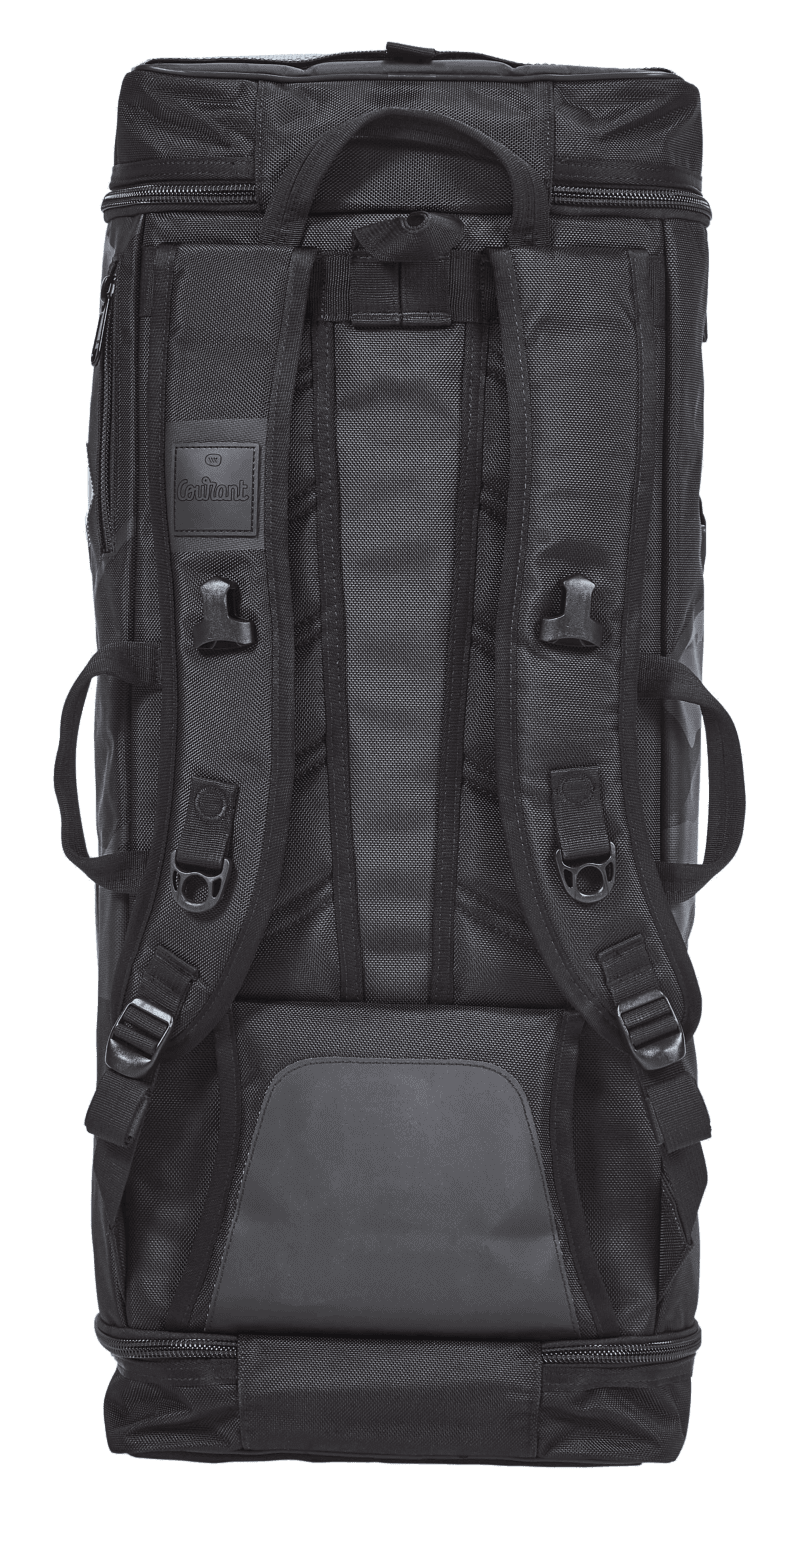 A Rear View Of The Courant Cross Pro Storage Bag In Tactical Black